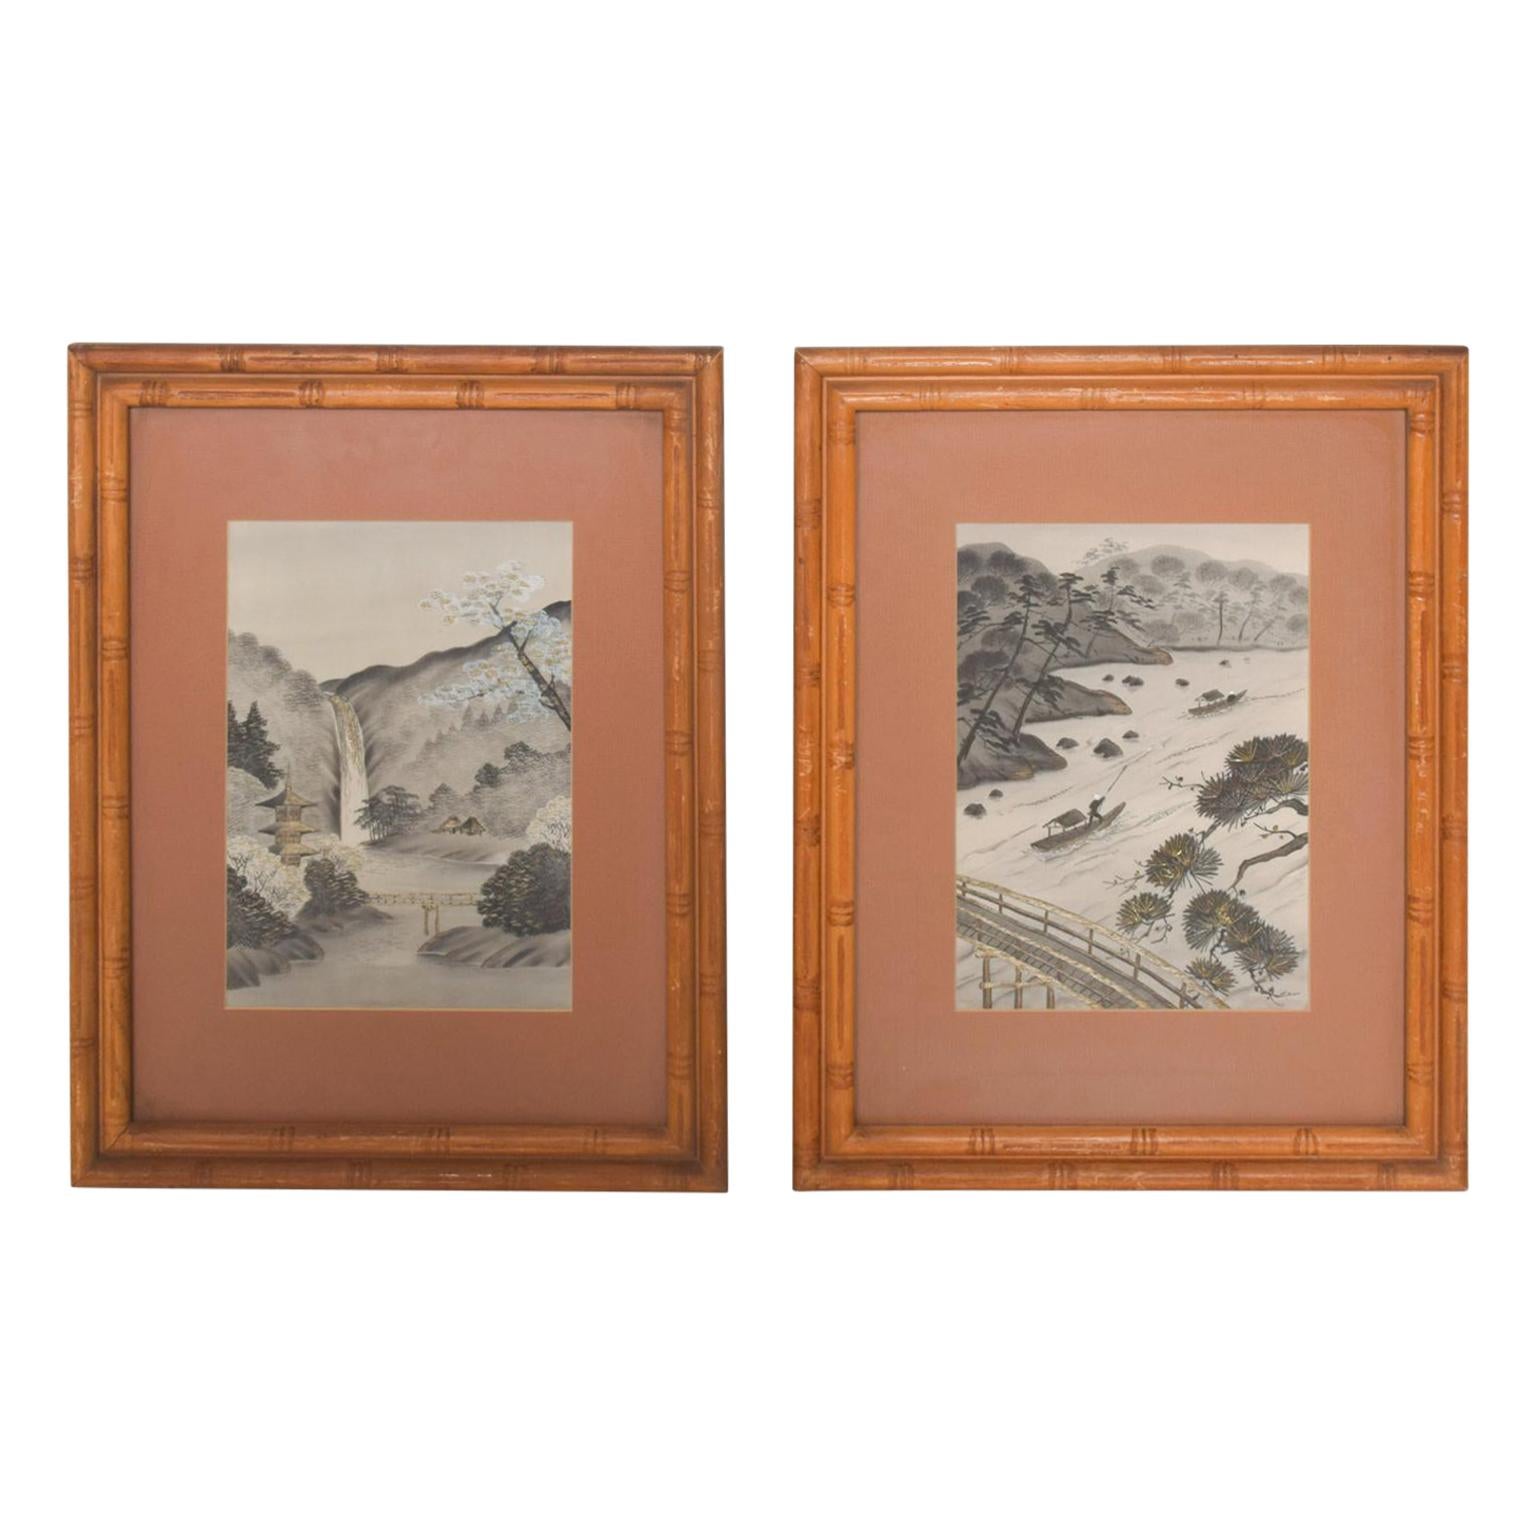 1960s Pair of Silk Embroidery Paintings Asian Landscape Art